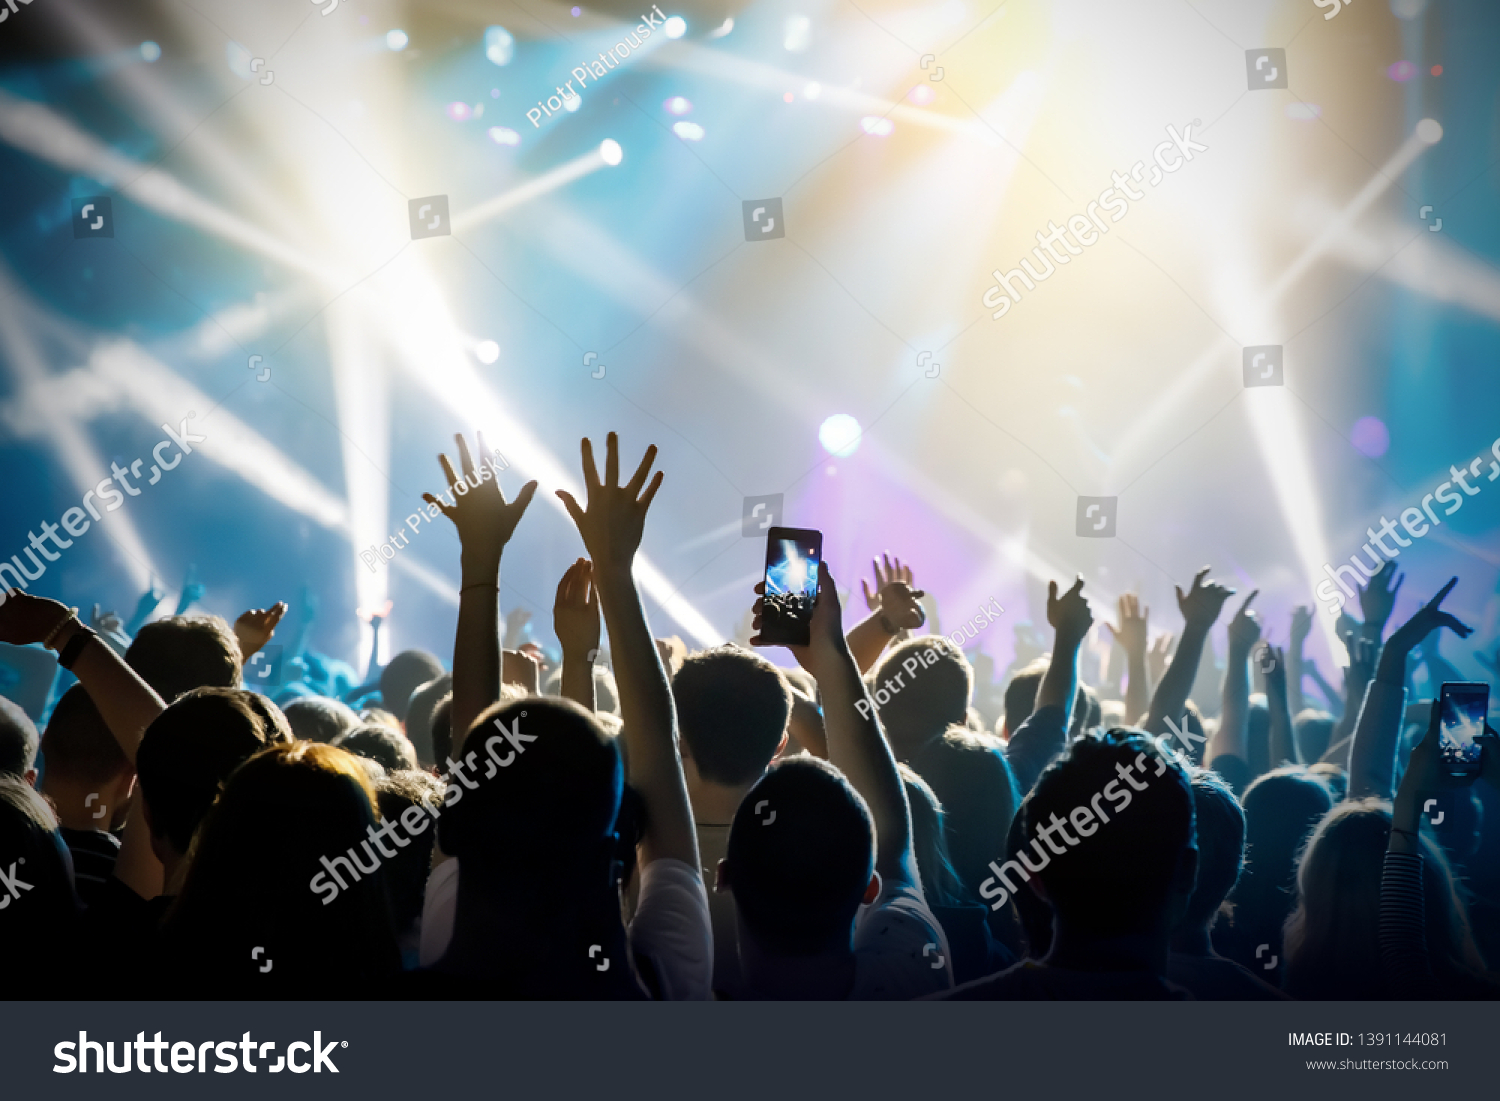 Raised hands in honor of a musical show on stage, People in the hall #1391144081